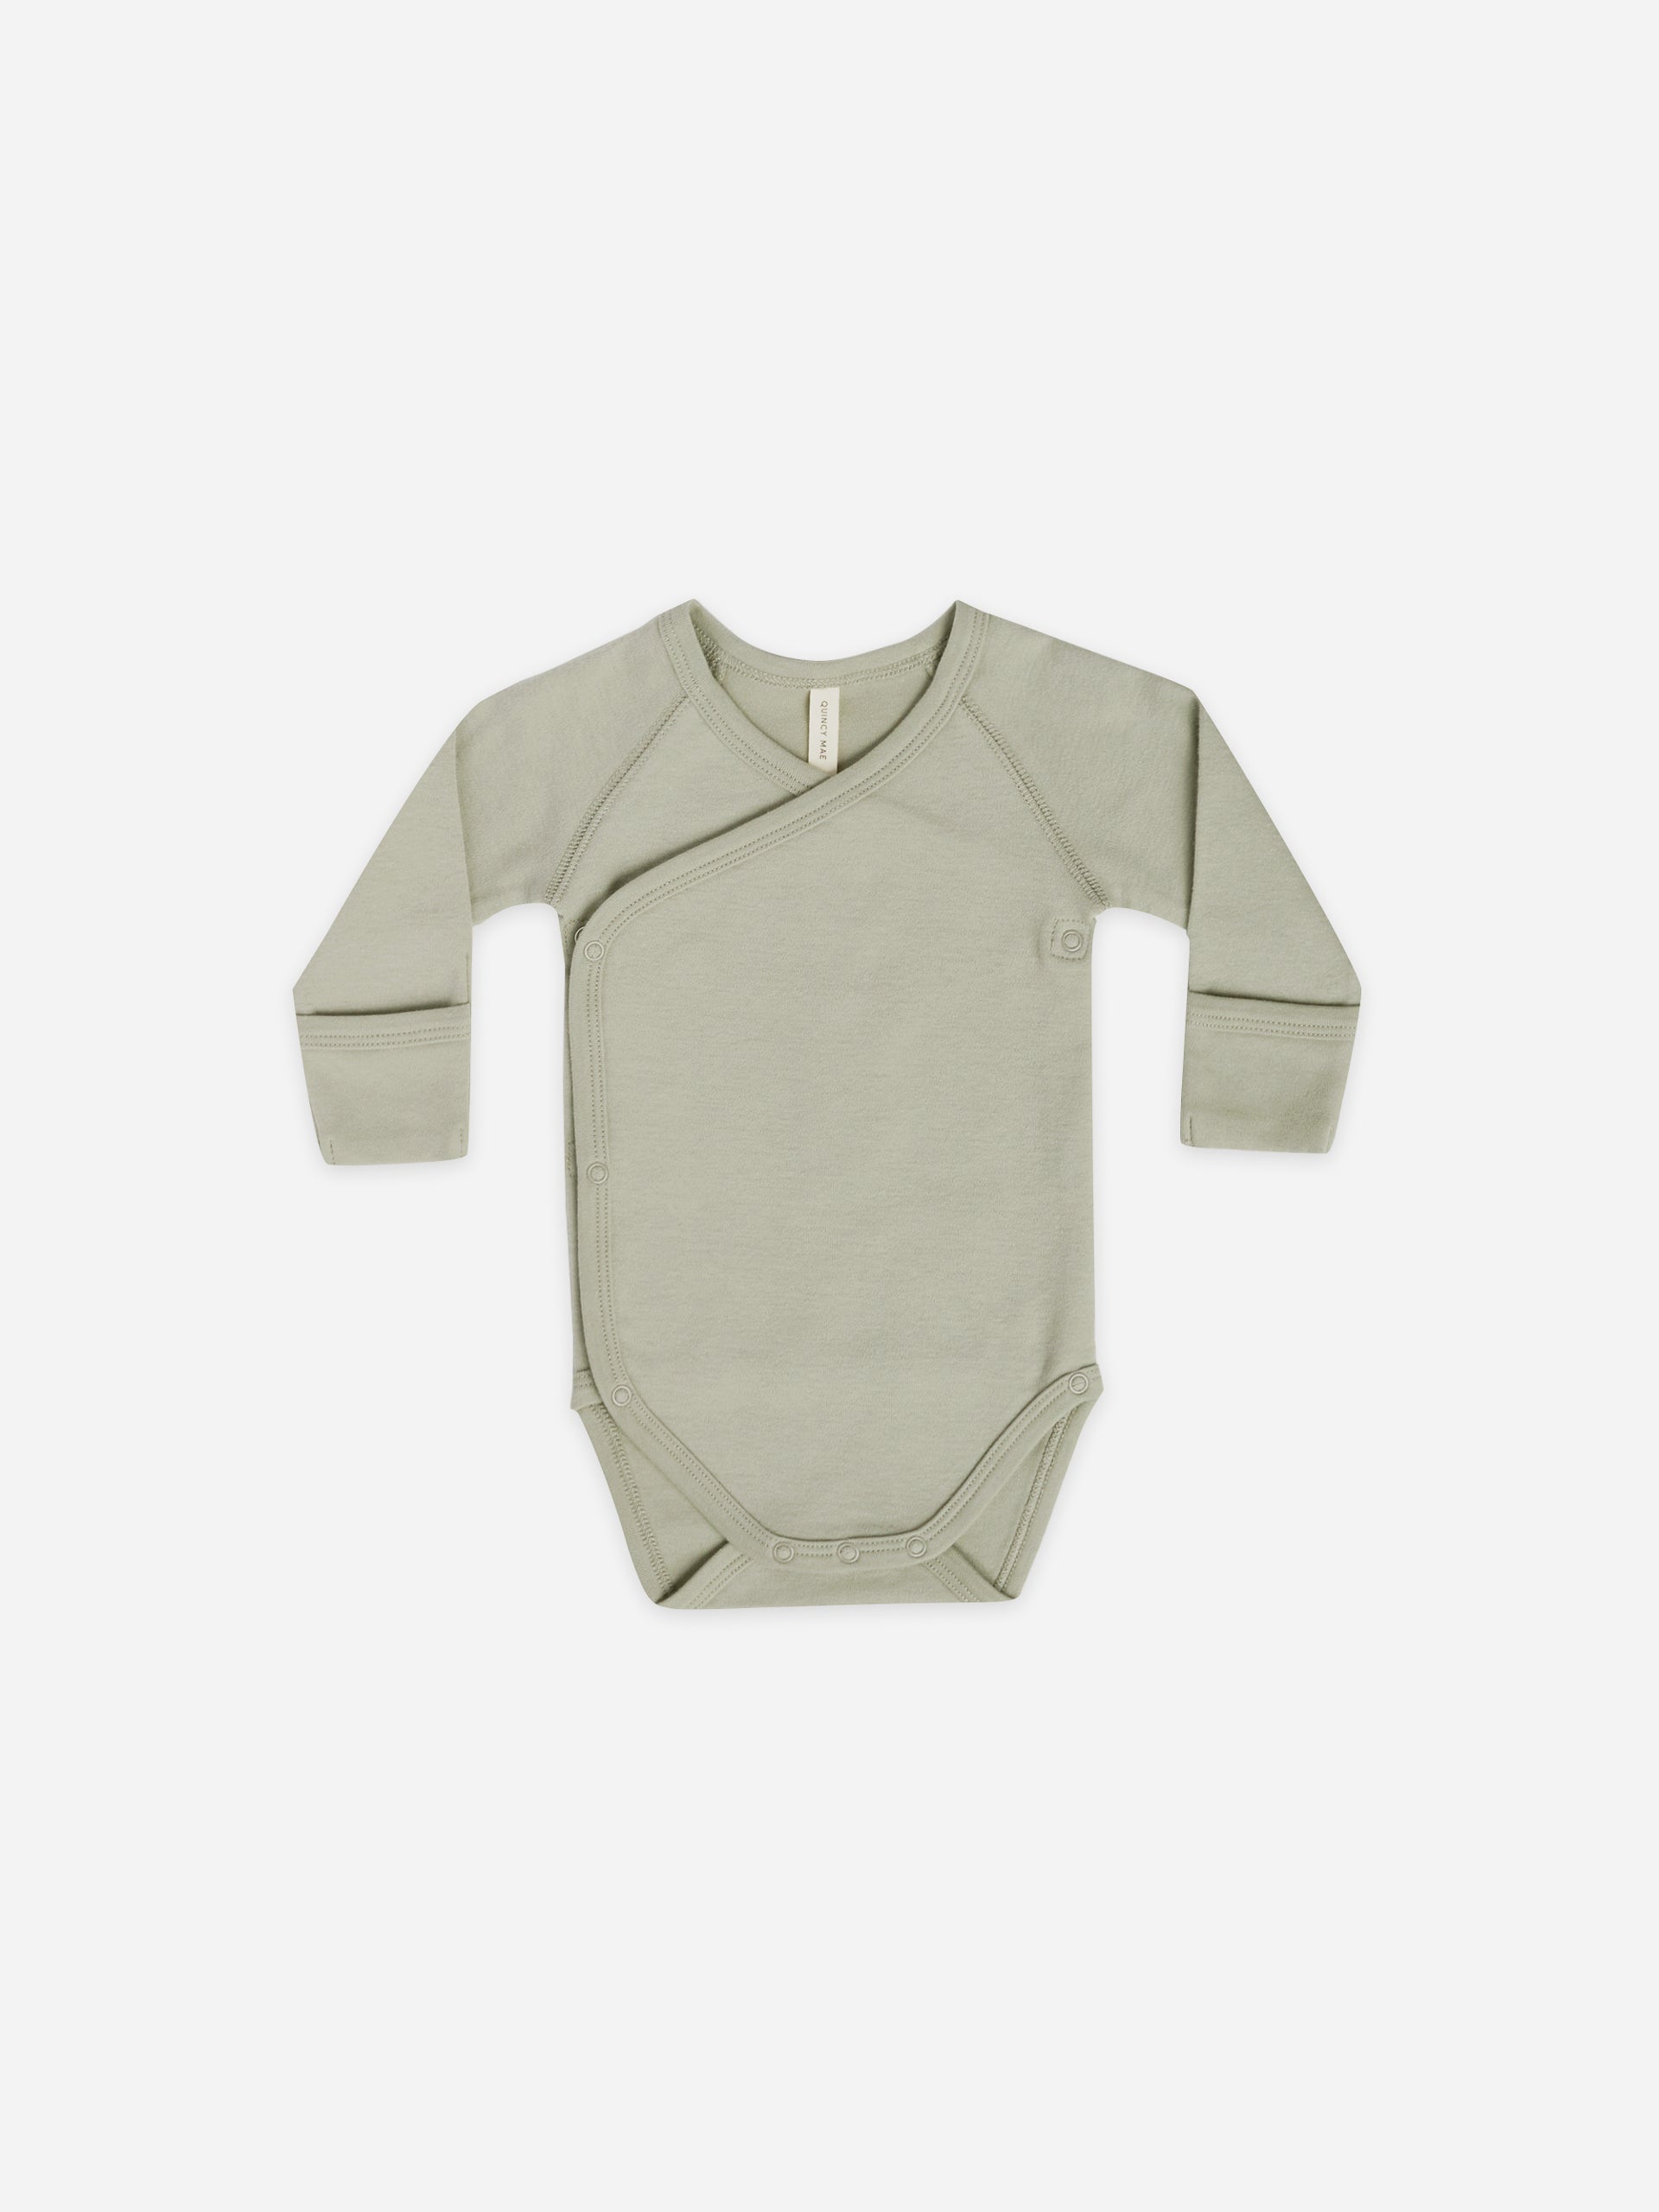 side snap bodysuit | pistachio - Quincy Mae | Baby Basics | Baby Clothing | Organic Baby Clothes | Modern Baby Boy Clothes |